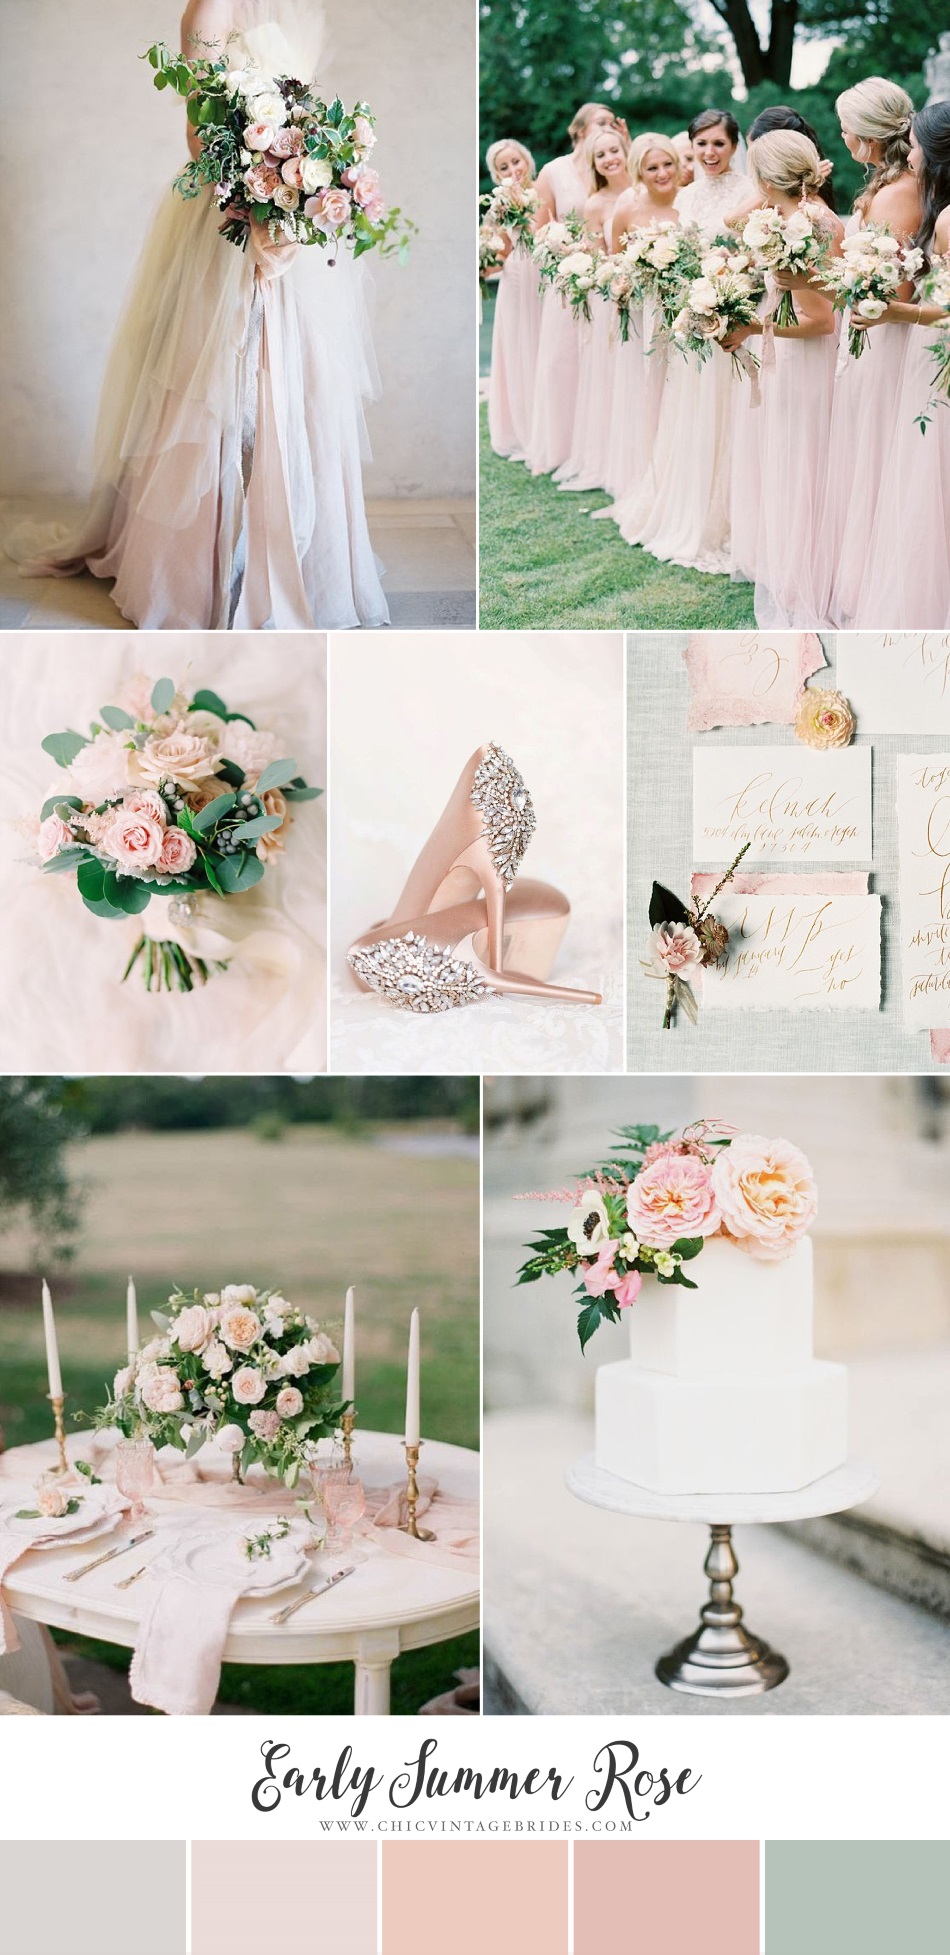 Early Summer Rose - Romantic Wedding Inspiration in the Softest Shades of Pink